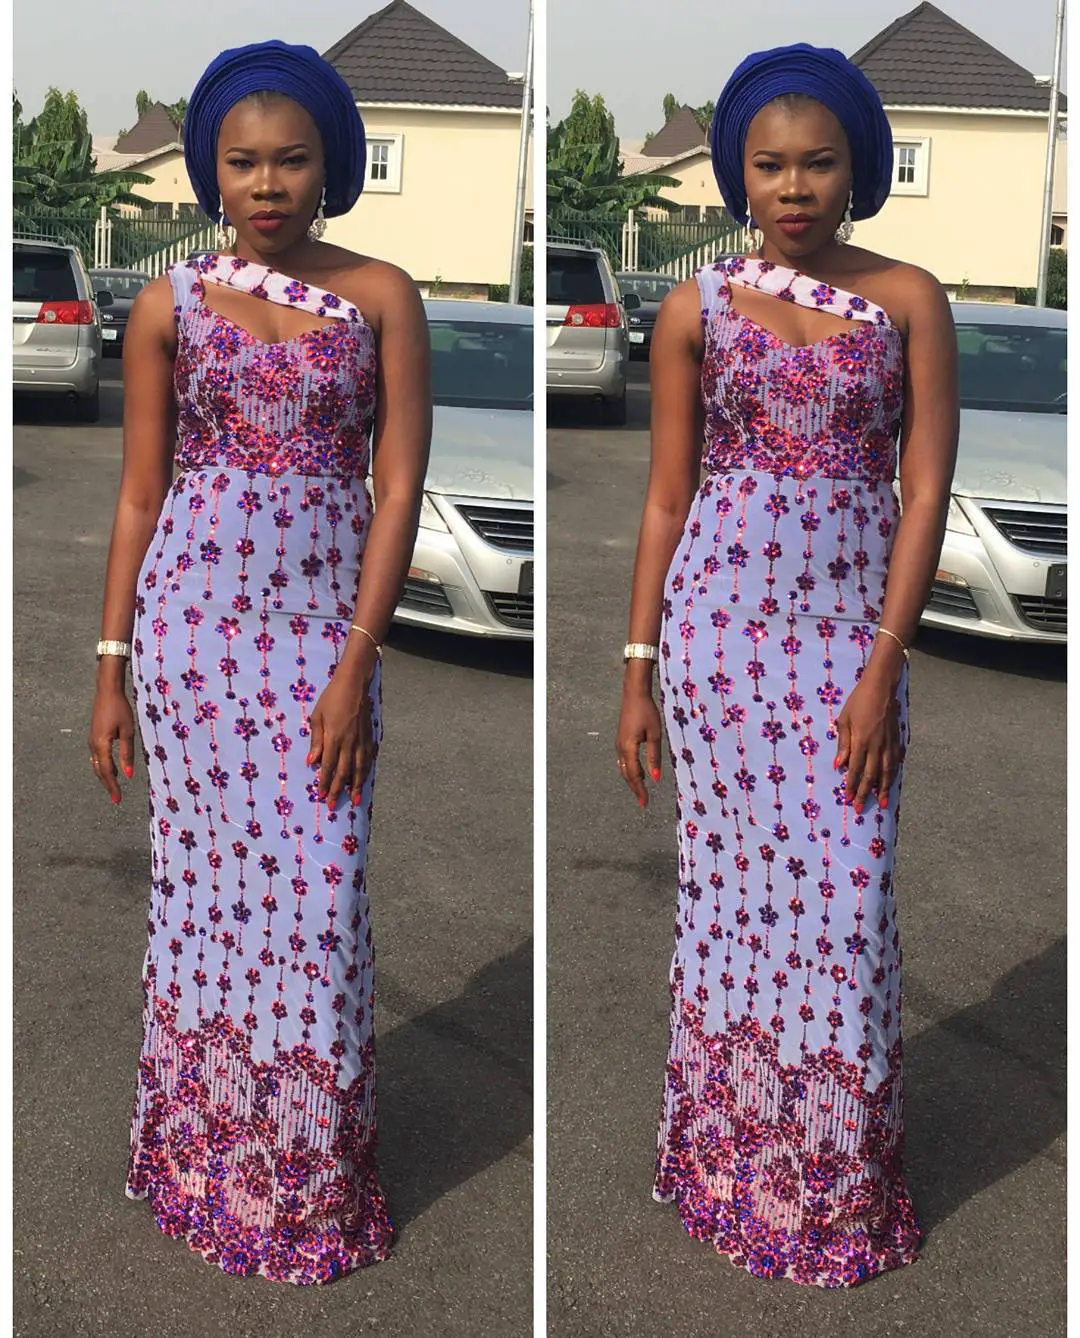 Sheer Elegance! The Aso Ebi Styles We Are Seeing Lately